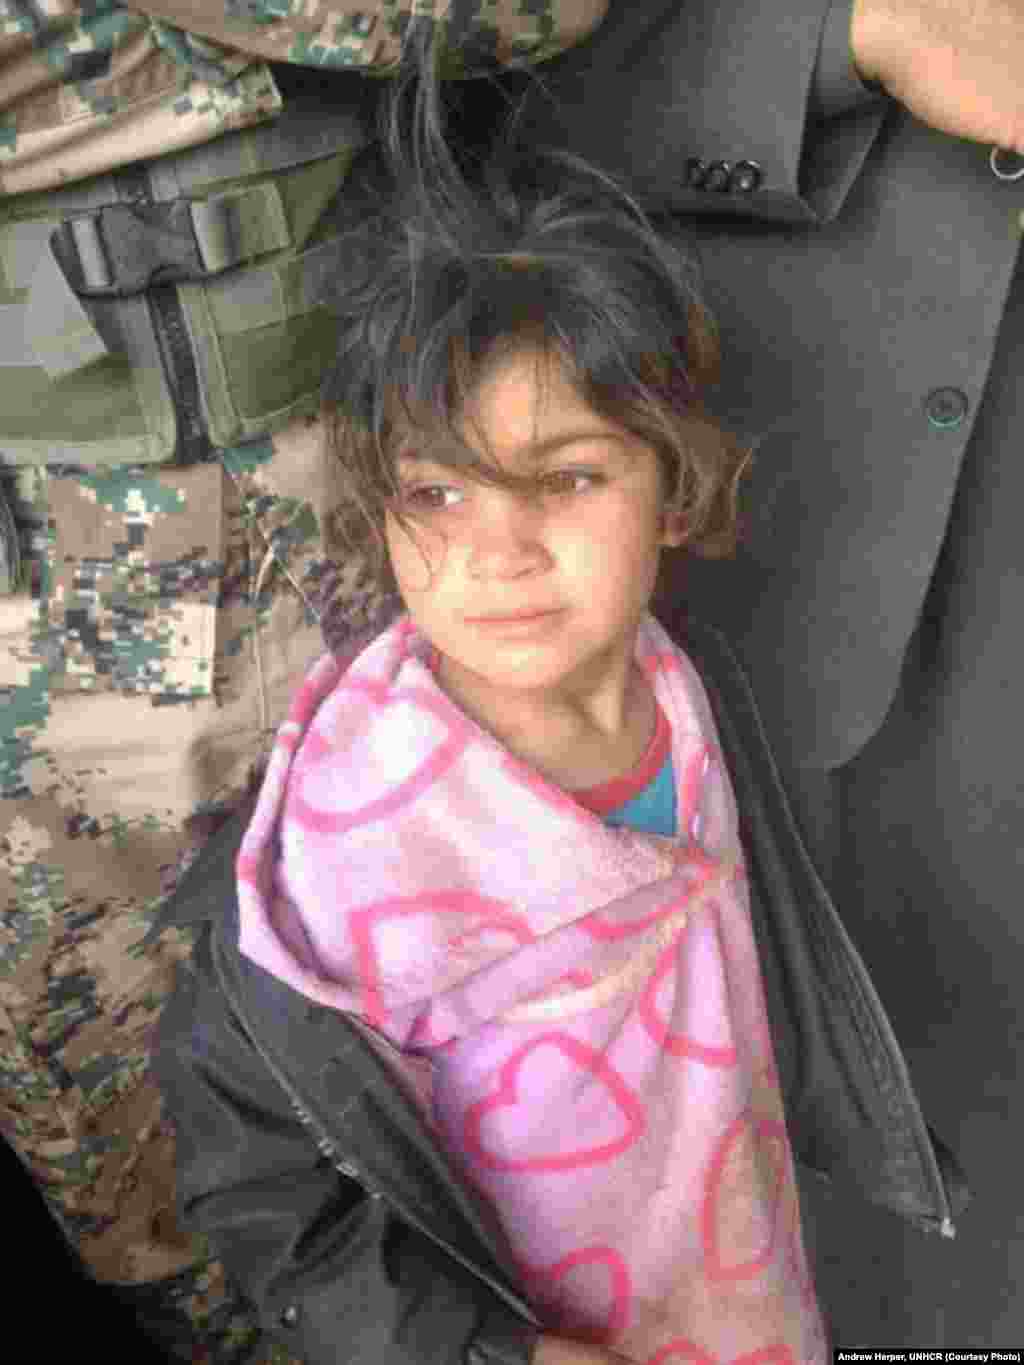 Rasha, age 8, fled Homs in her pajamas after her house was shelled. She travelled for 12 days to reach the Jordan border.